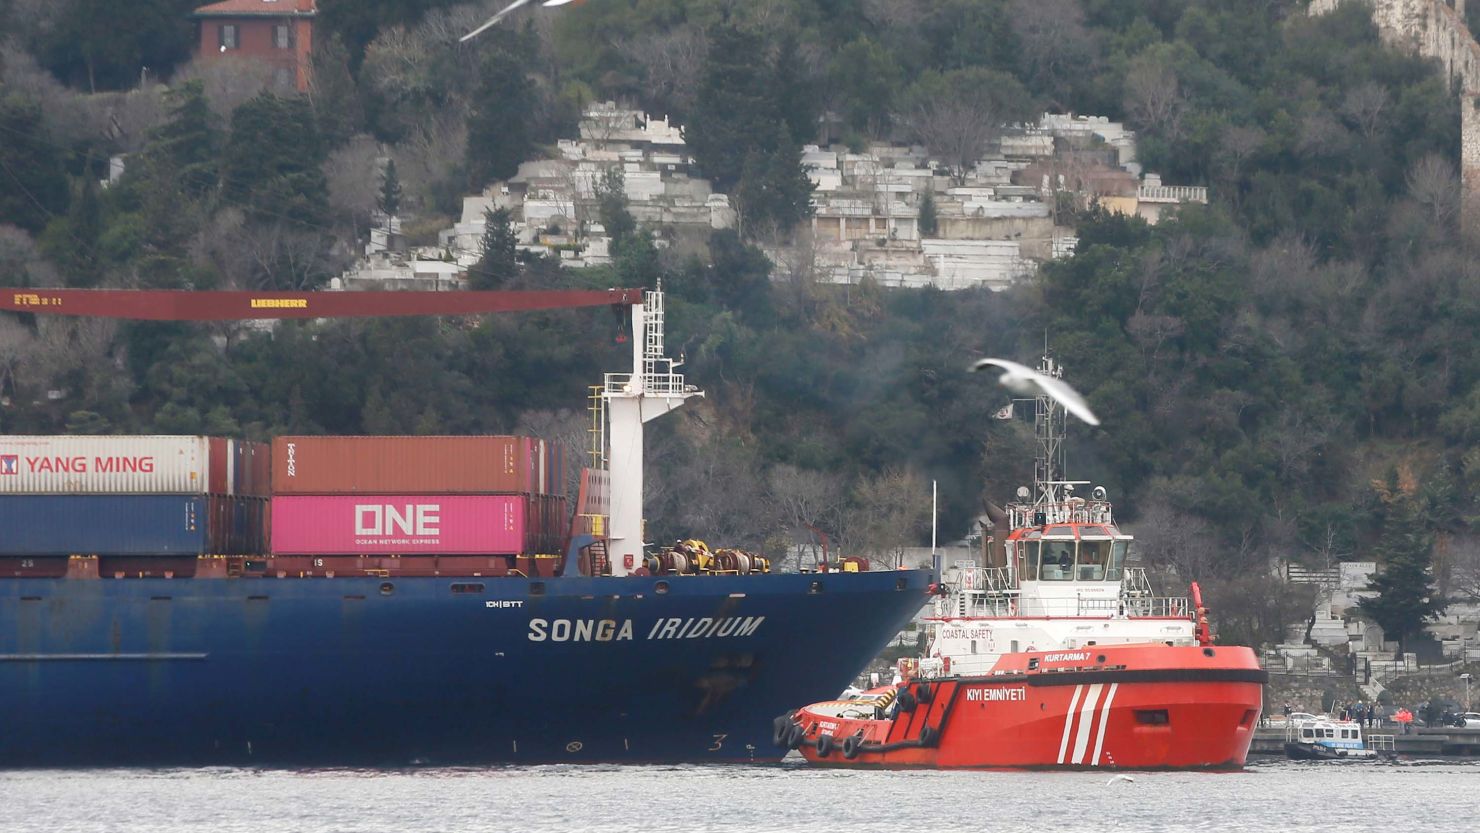 A Liberian registered container ship ran ashore in Istanbul's Bosphorus.